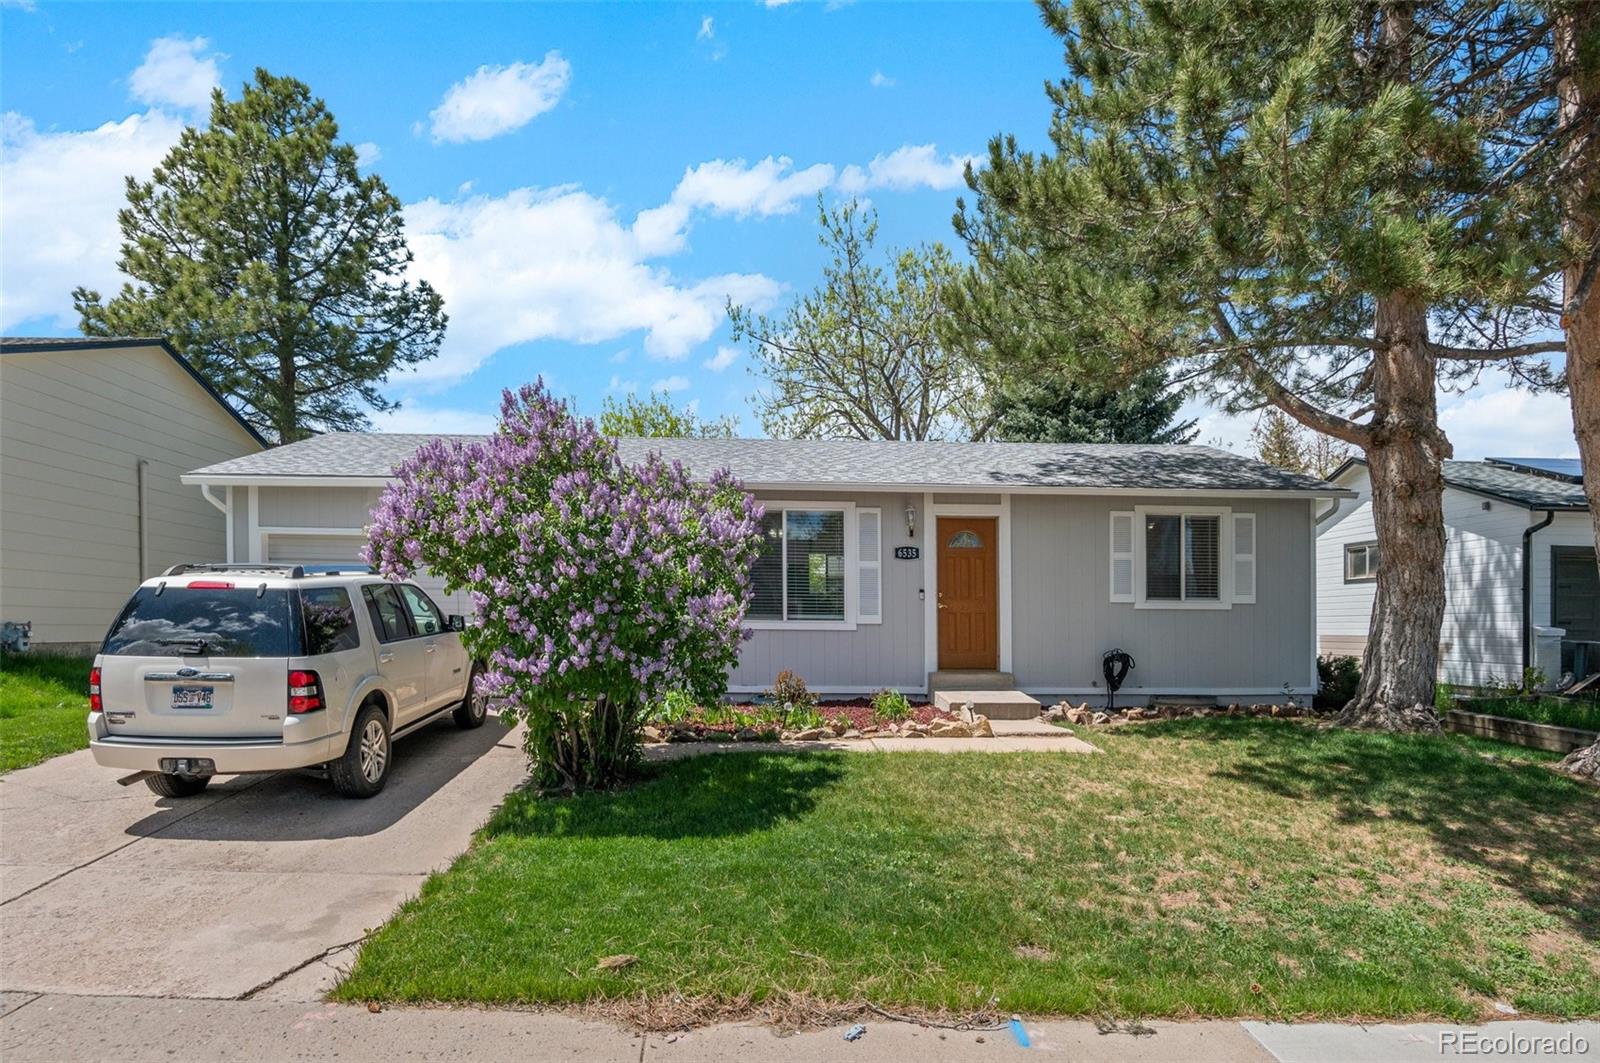 Report Image for 6535 S Dudley Way,Littleton, Colorado